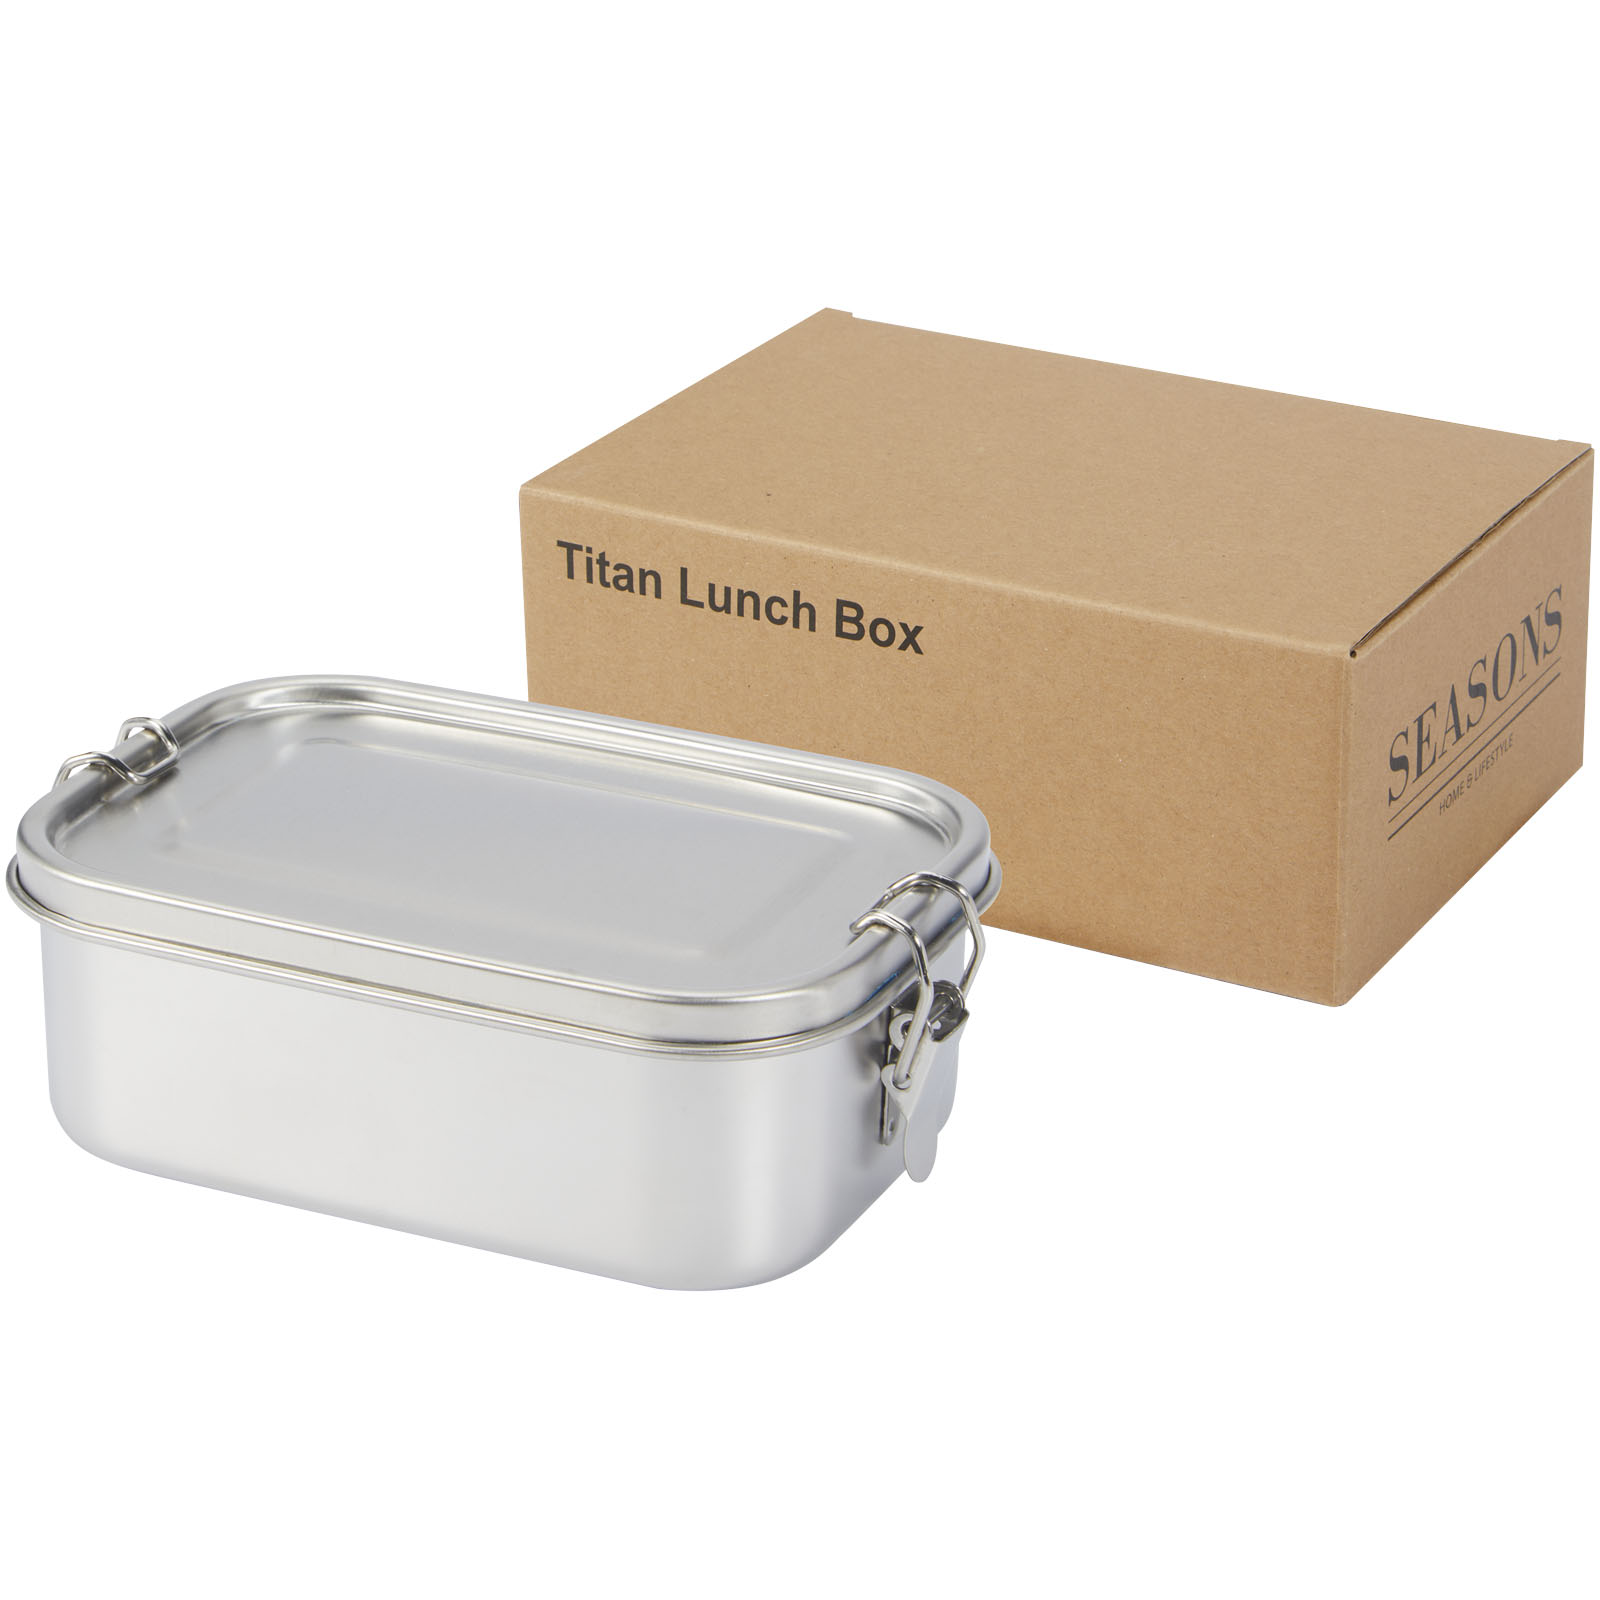 Advertising Lunch Boxes - Titan recycled stainless steel lunch box